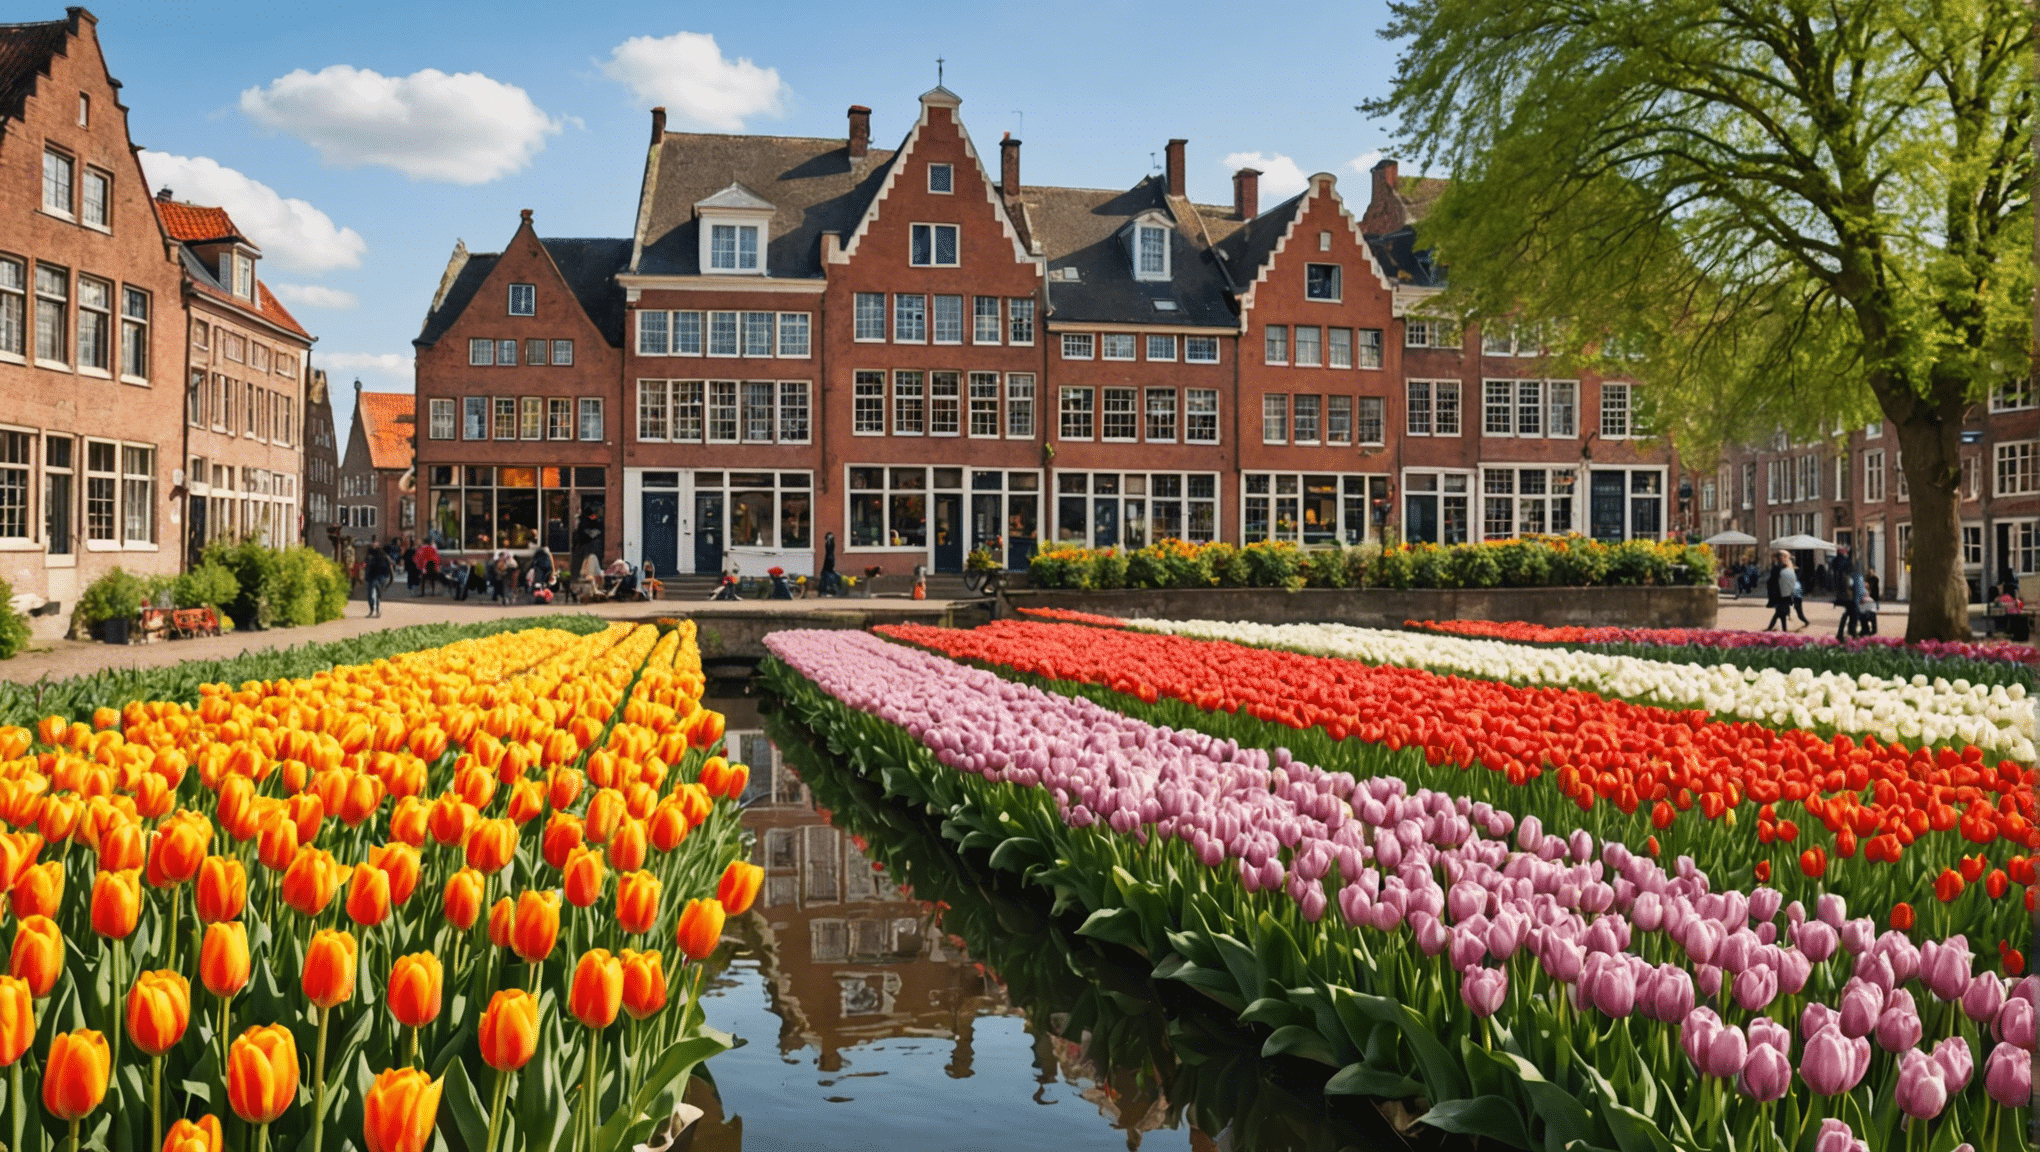 discover the charms of the Netherlands: an unforgettable journey through this country of emblematic windmills, magnificent tulip fields and charming canals